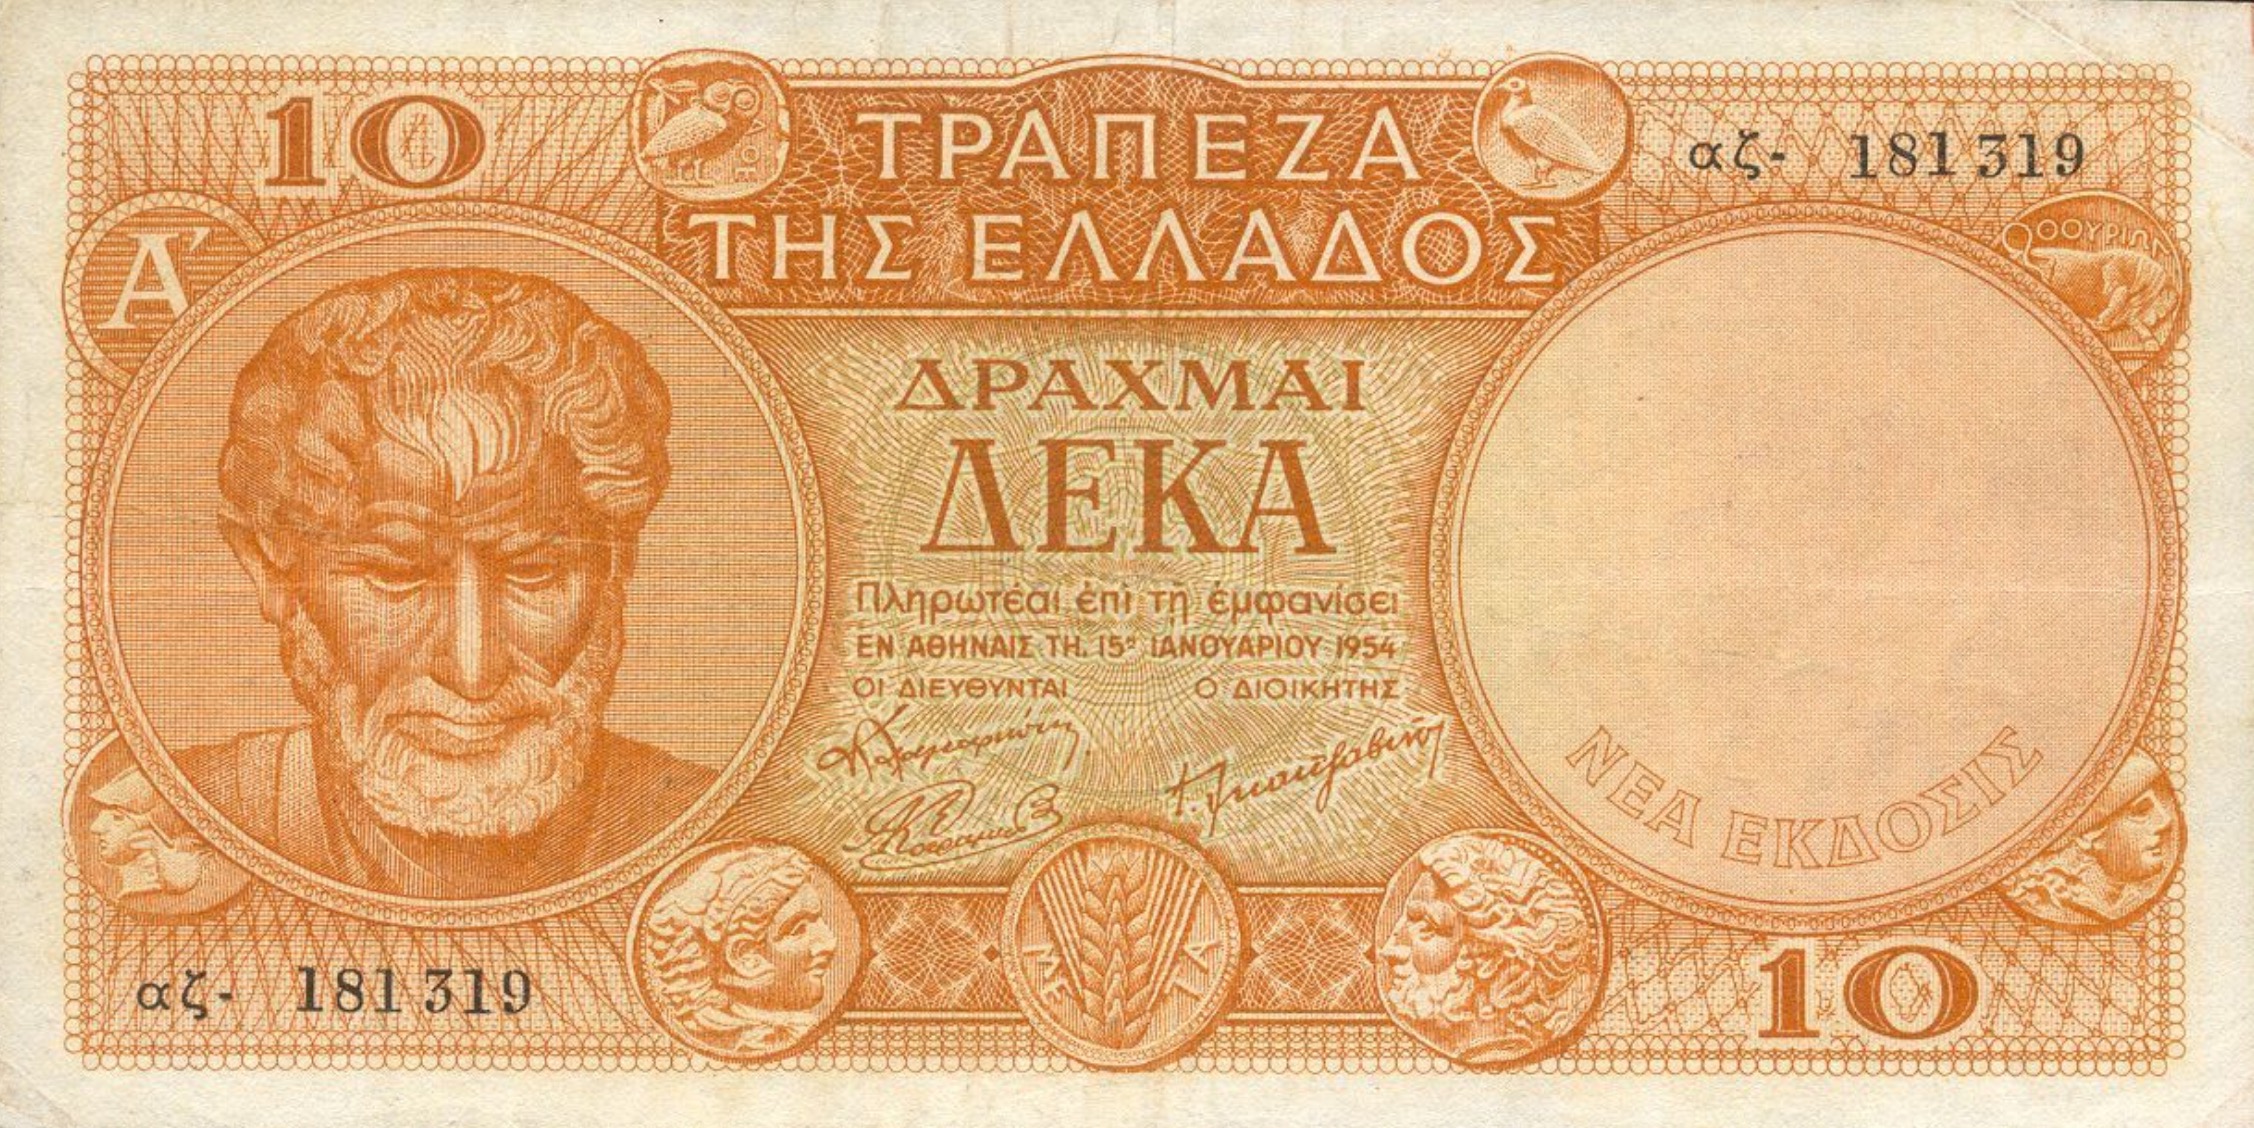 10 Greek Drachmas banknote (Aristotle) - Exchange yours for cash today